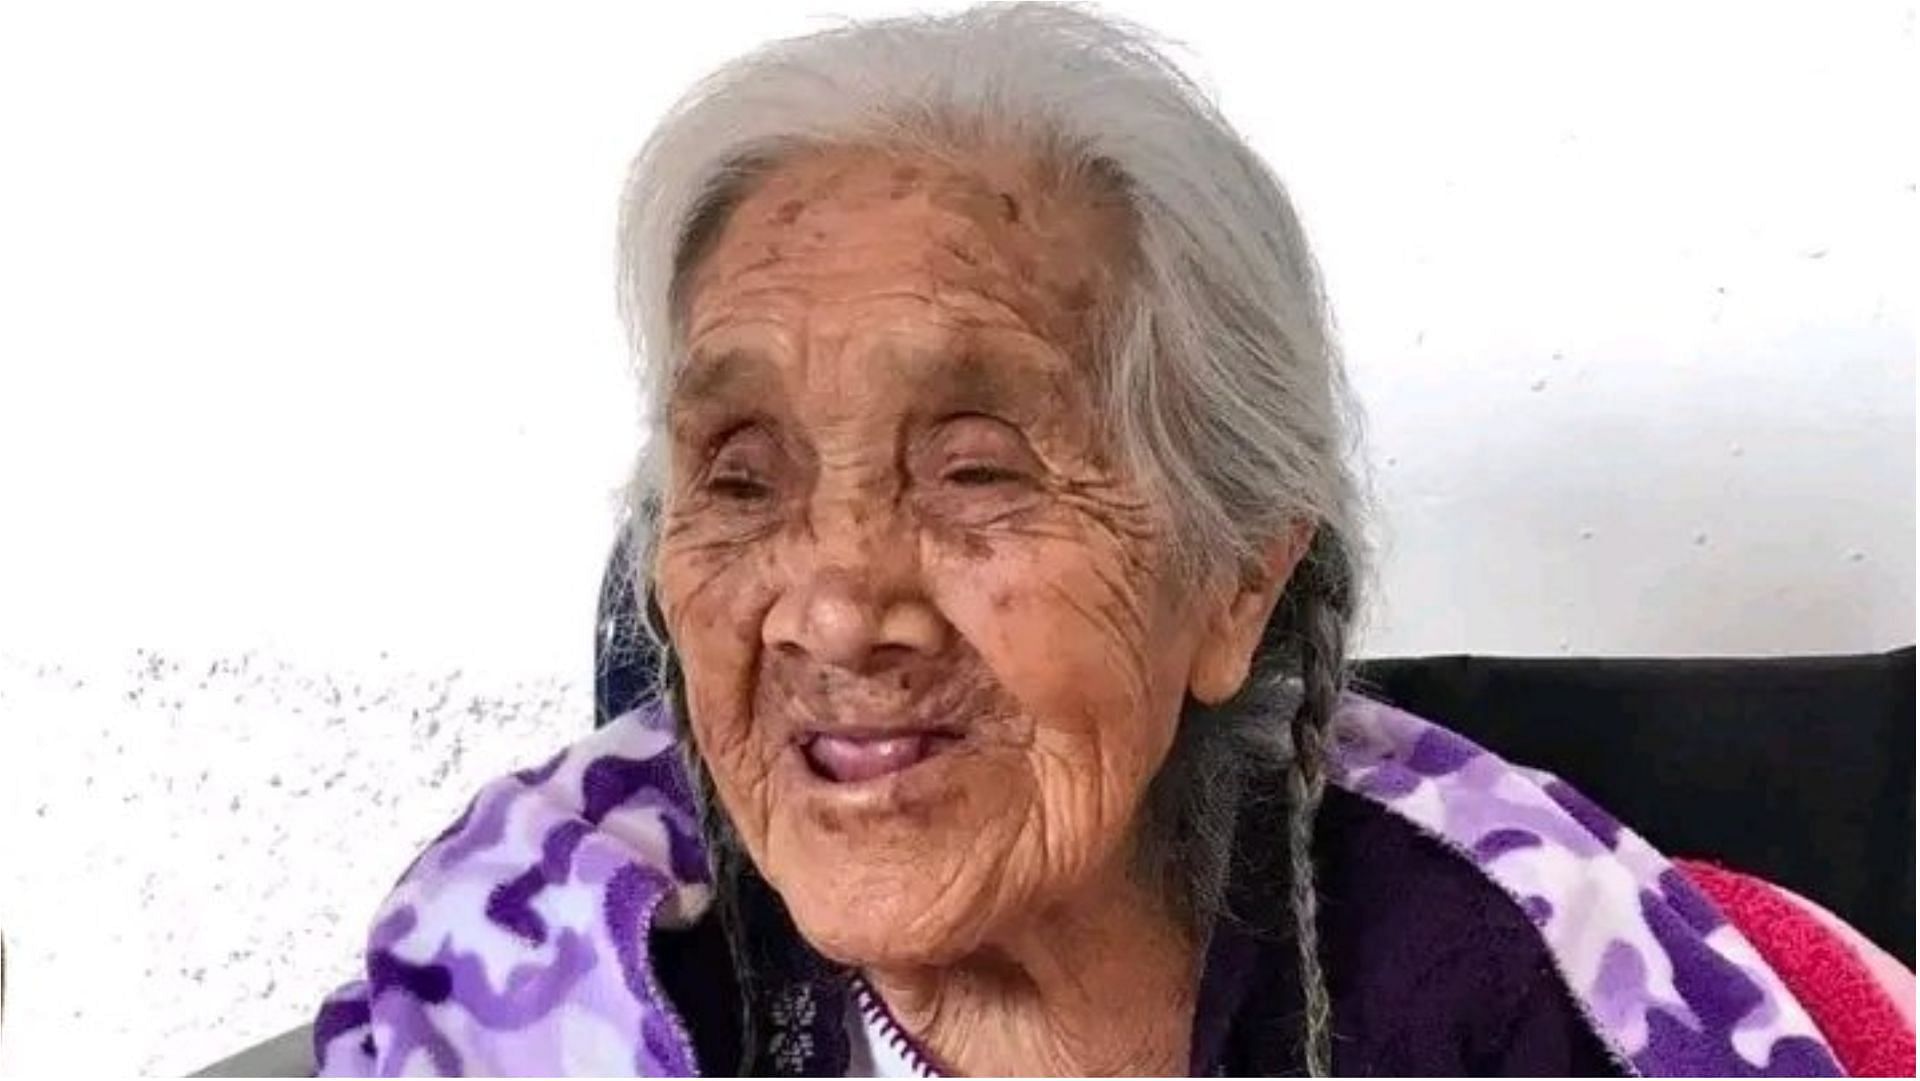 Maria Salud Ramirez Caballero recently died at the age of 109 (Image via reyiggy/Twitter)